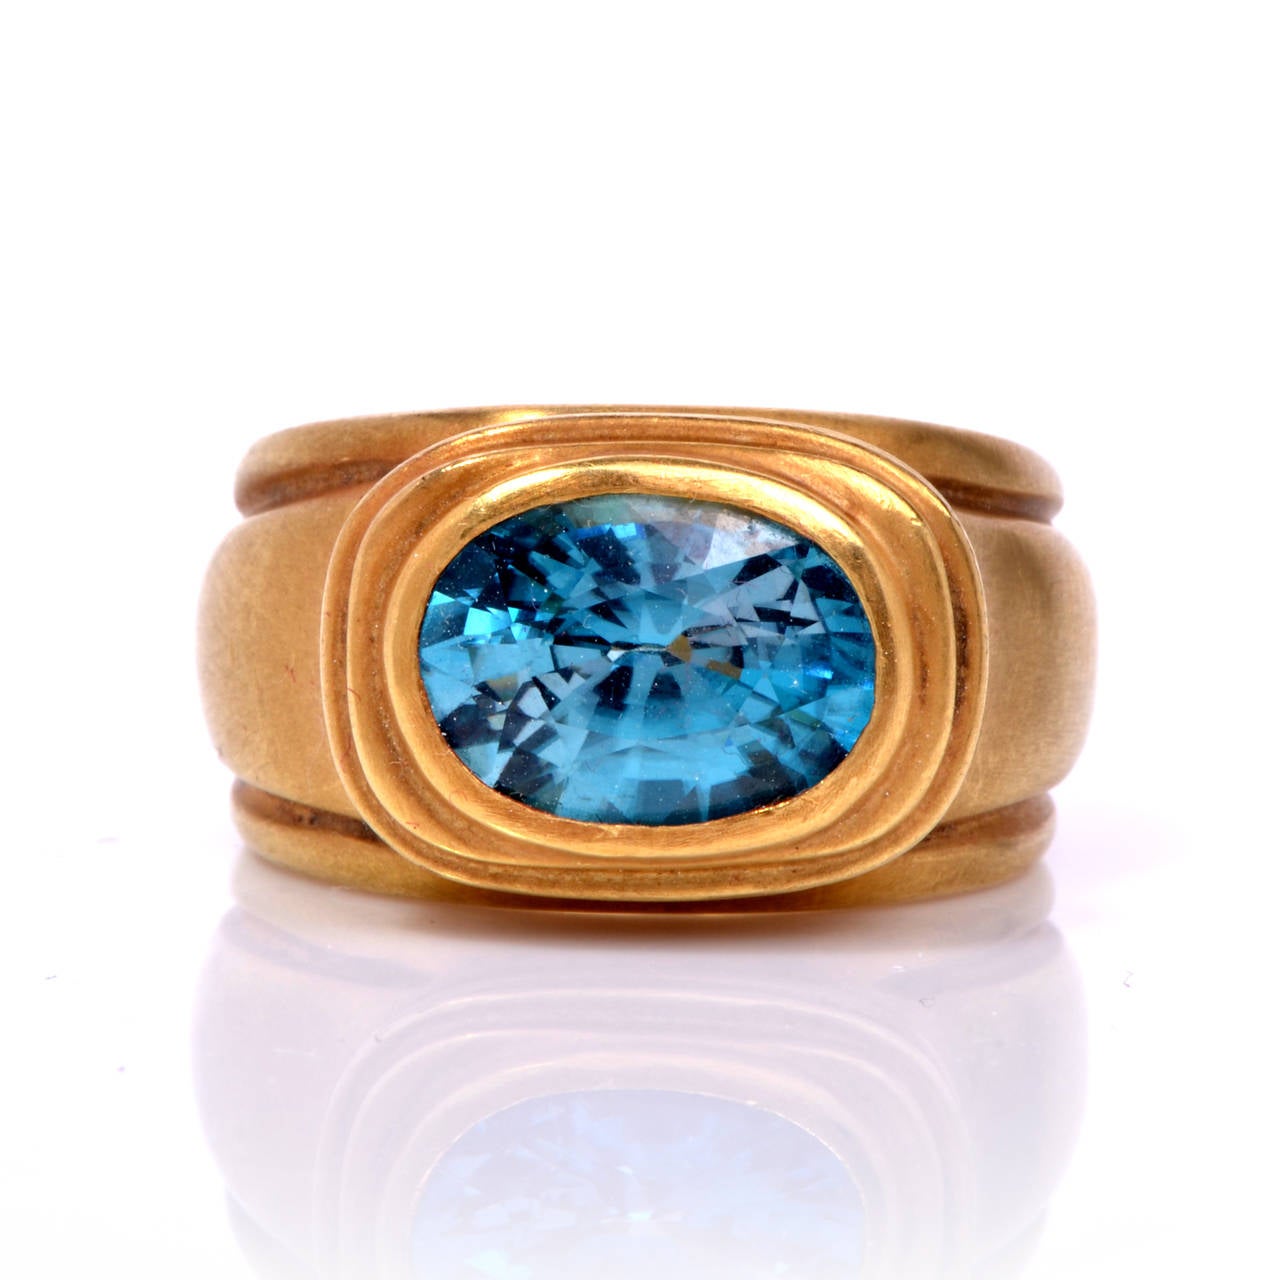 This mesmerizing and substantial ring is a truly exquisite creation. Finely crafted in solid 18K greenish yellow gold, it features a bezel set genuine oval cut blue zircon approx. 5.00ct. The gleaming and colorful center stone is complimented by the